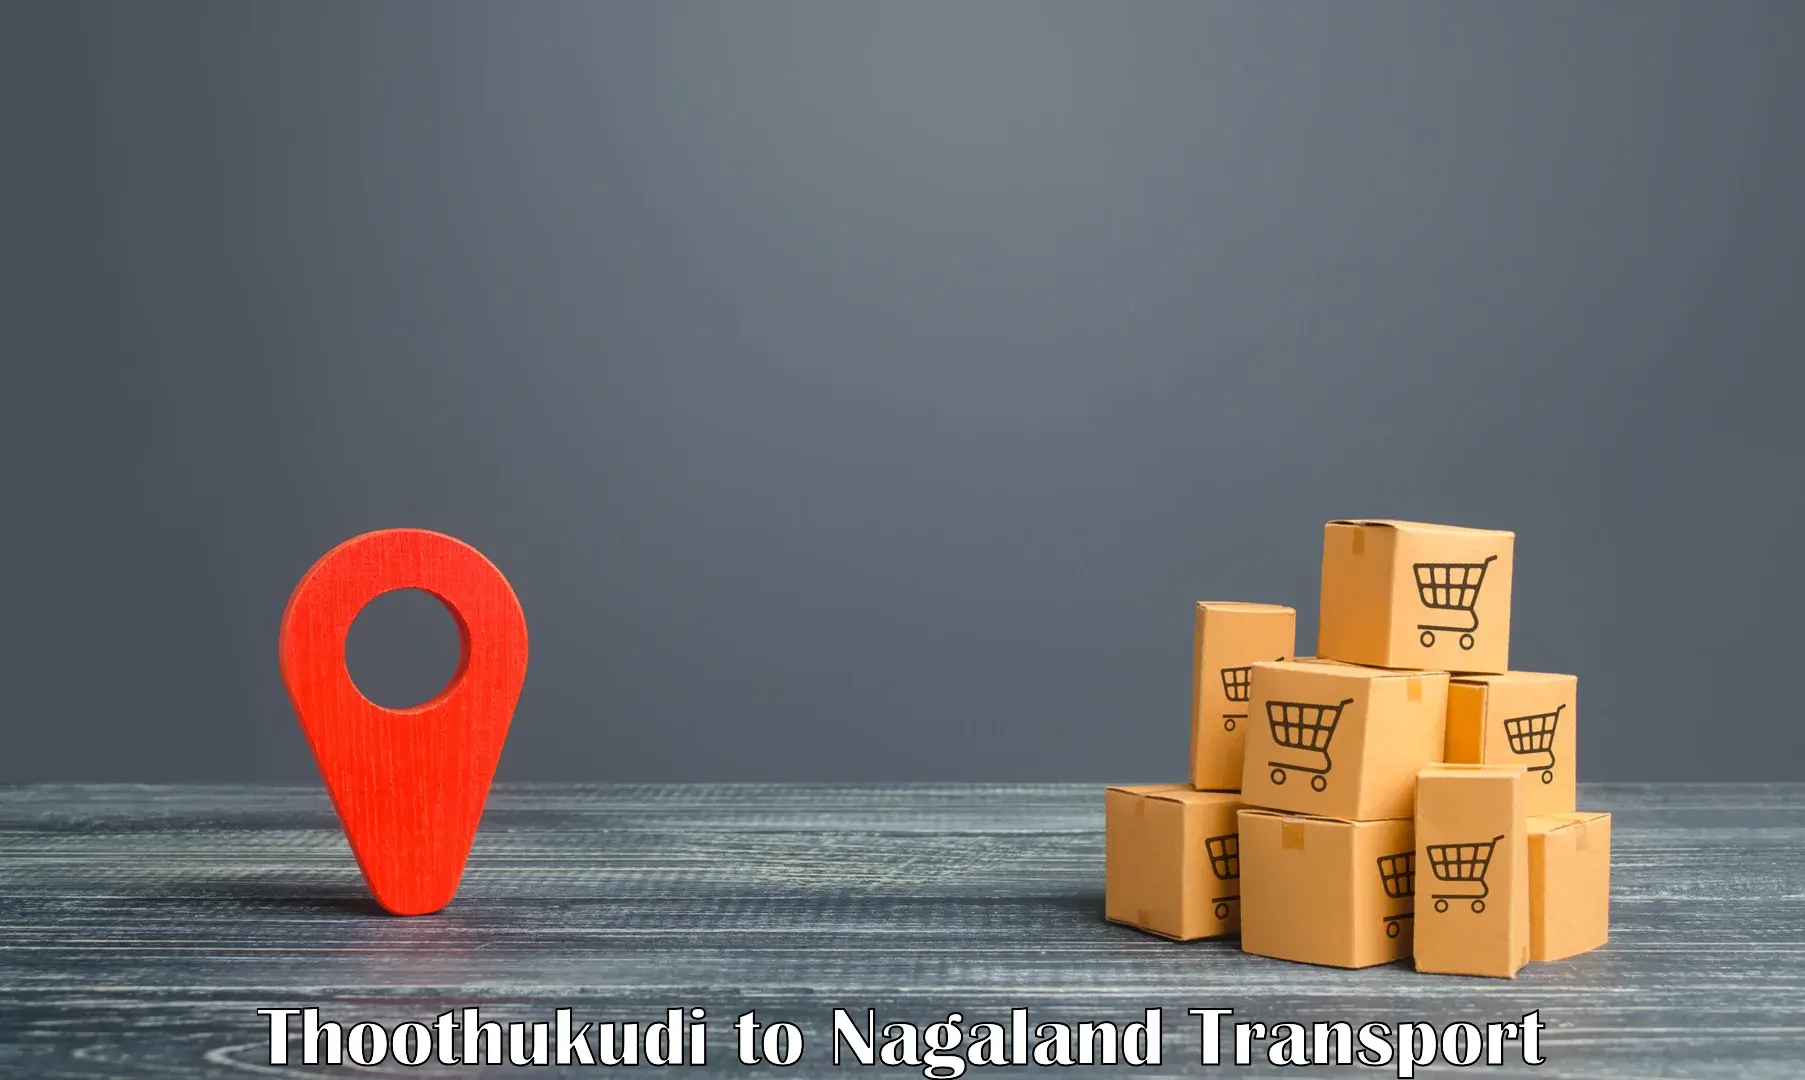 Container transport service in Thoothukudi to Nagaland